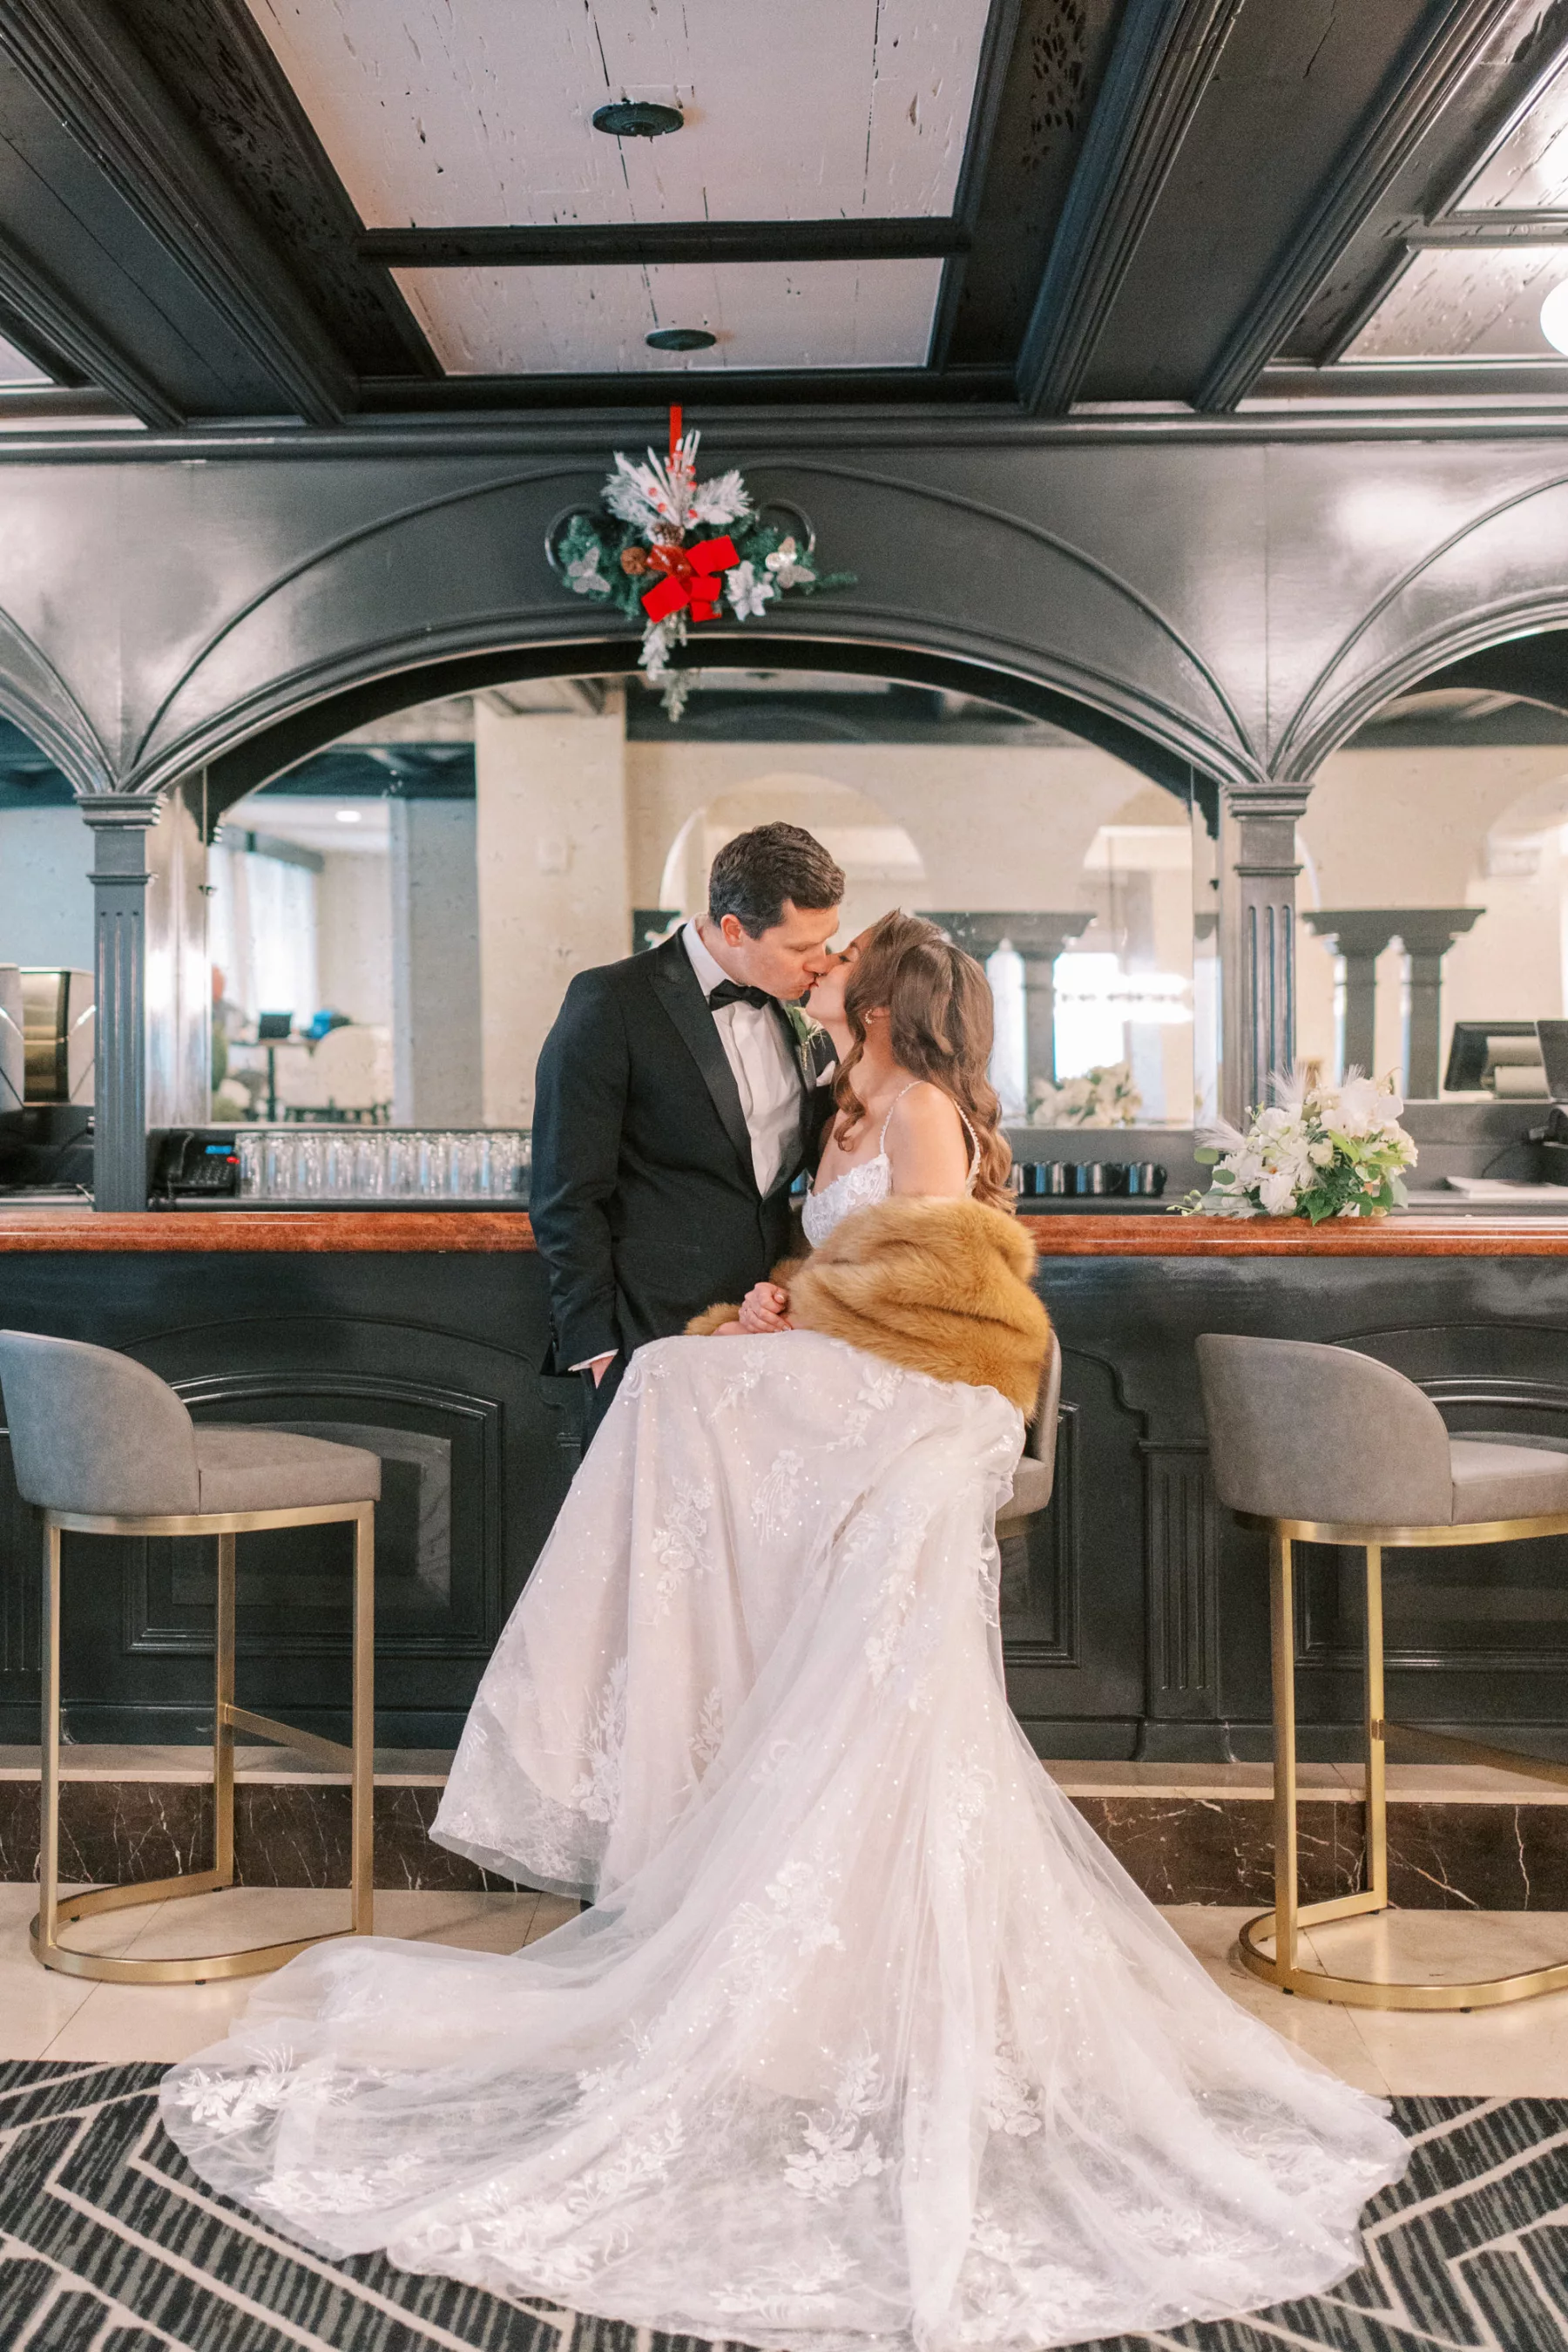 Bride and Groom Bar Wedding Portrait | Tampa Bay Content Creator Behind The Vows | Photography Eddy Almaguer Photography | Videographer Priceless Studio Design